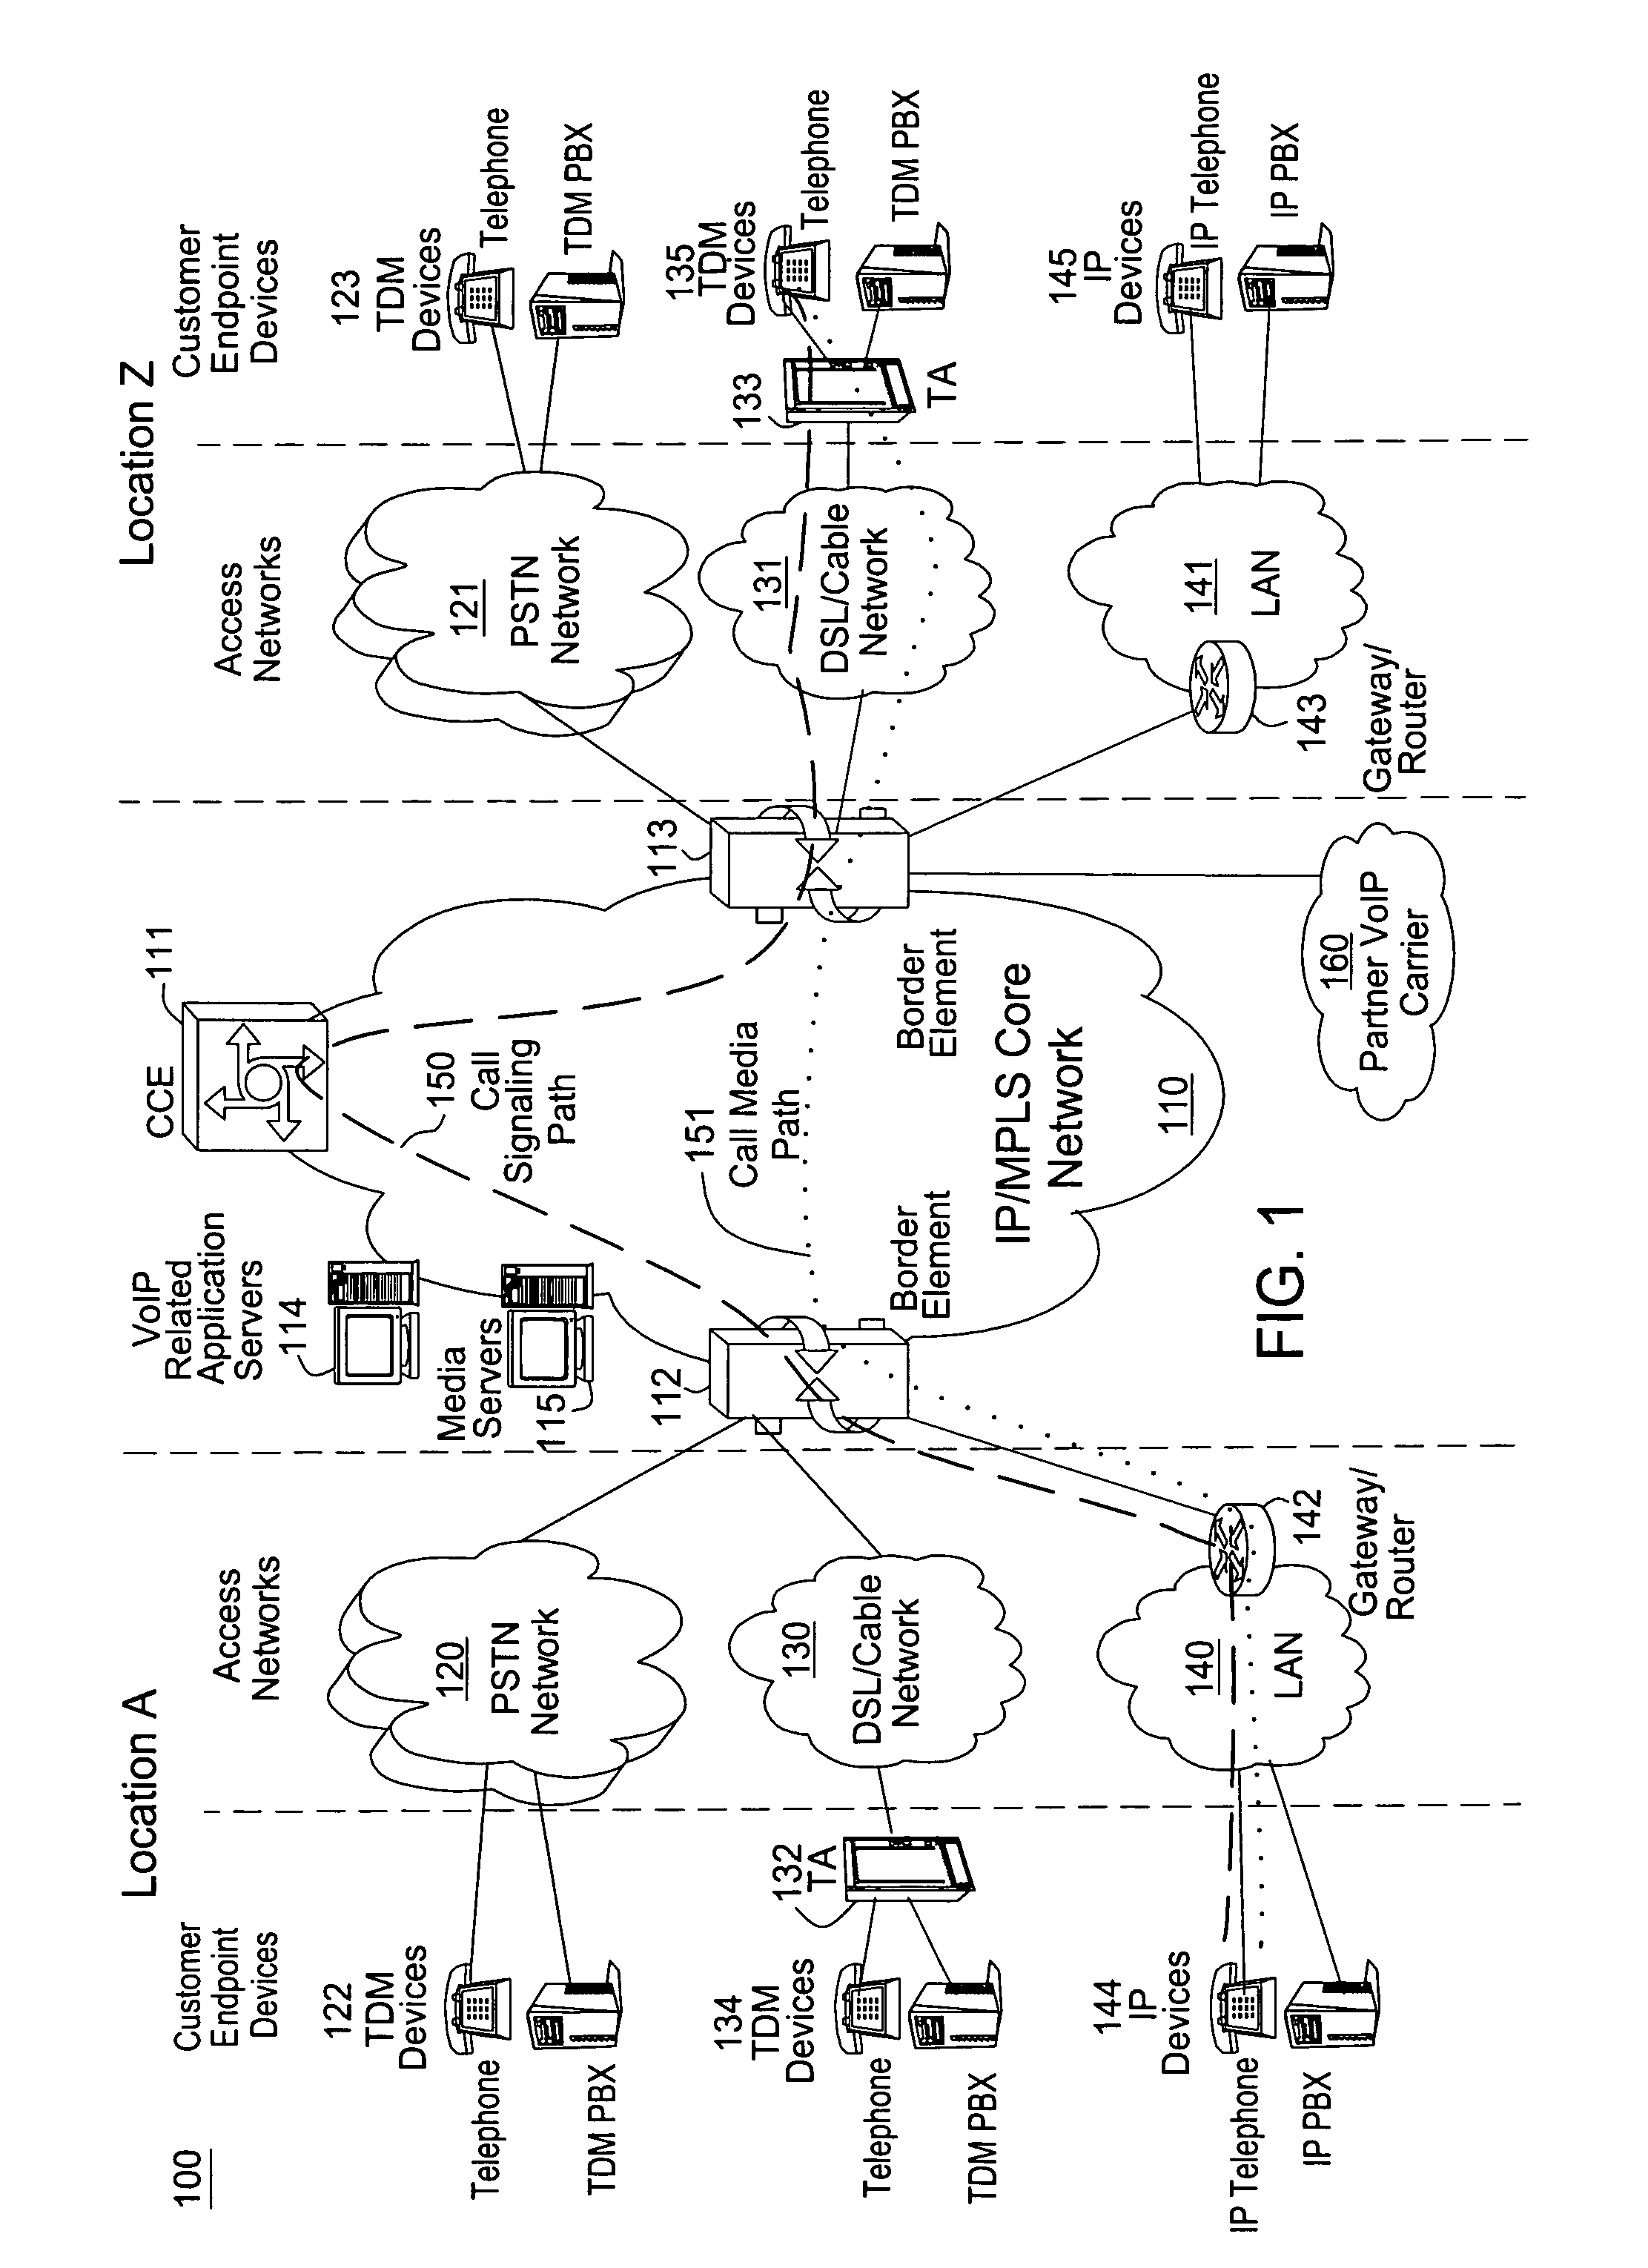 Method and apparatus for updating a shortest path graph